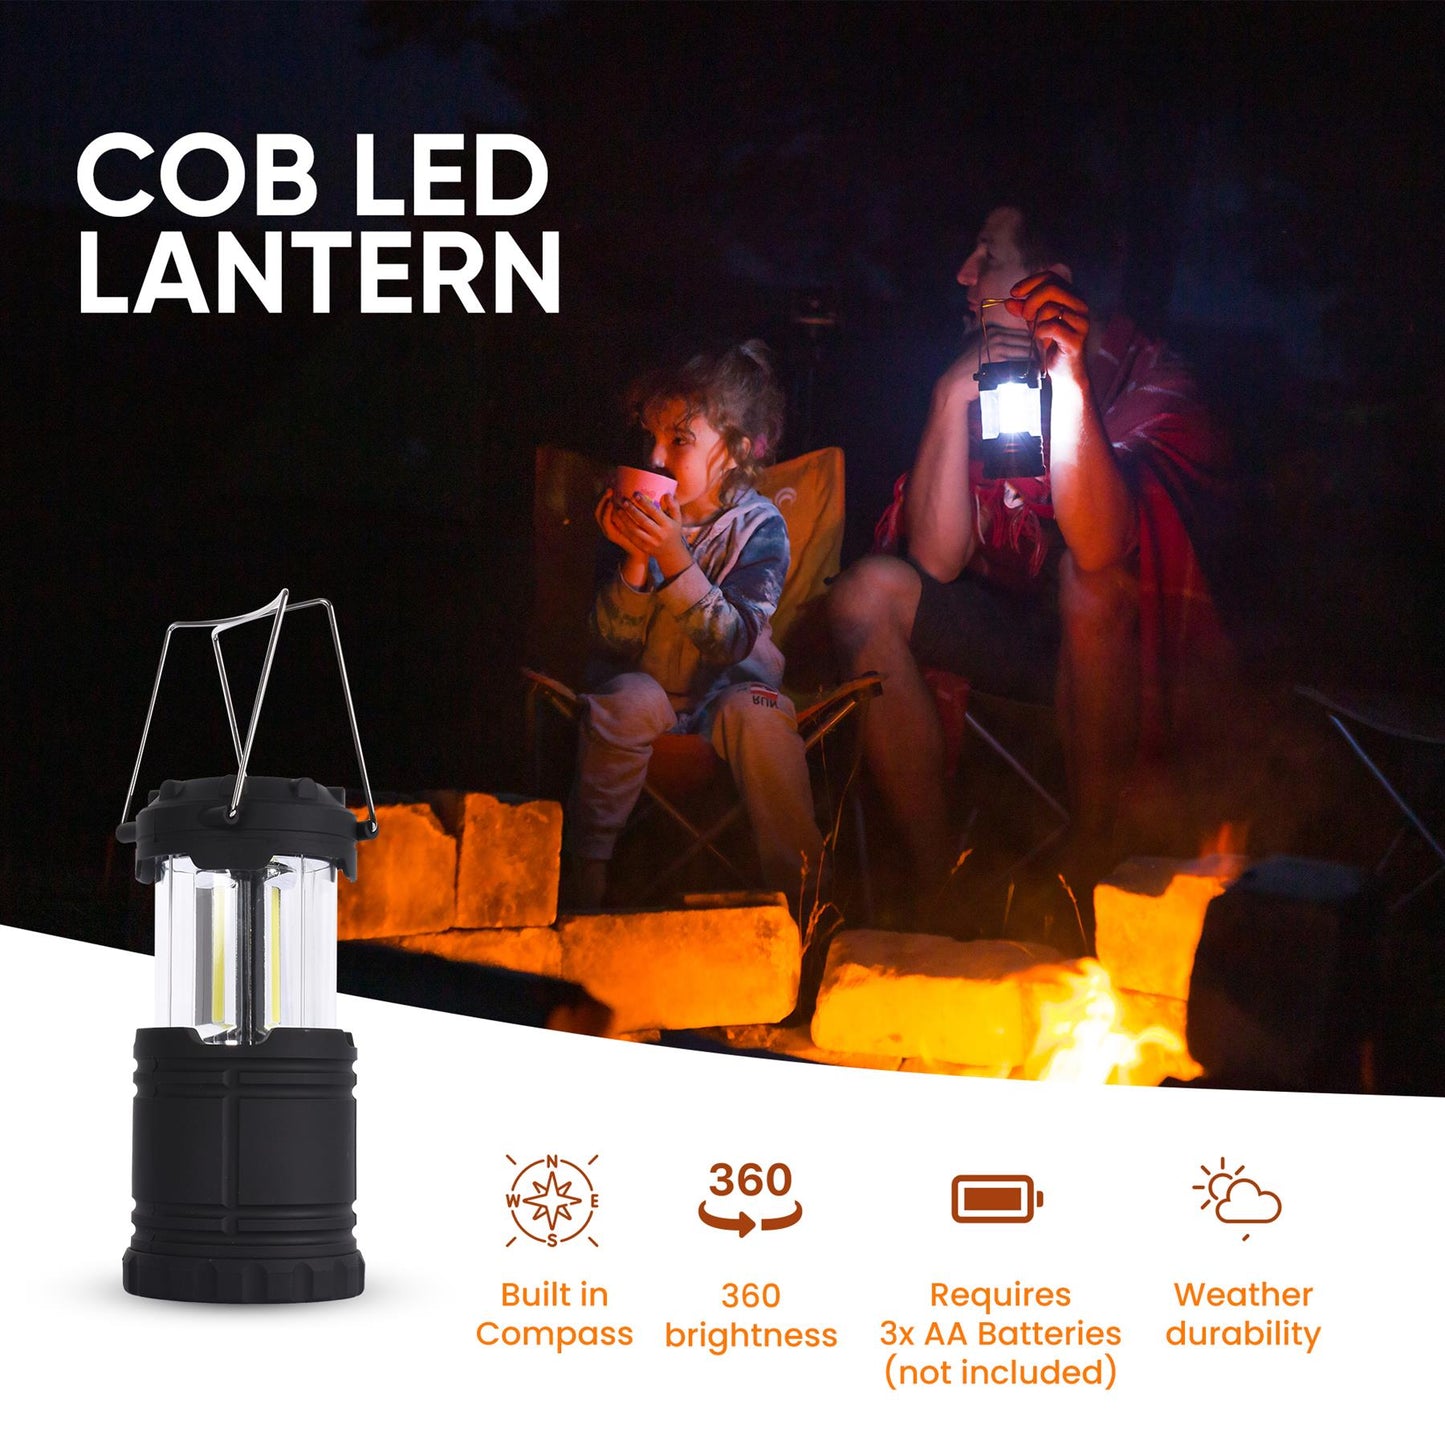 Bright Led Collapsible Lantern And Torch Headlight Set